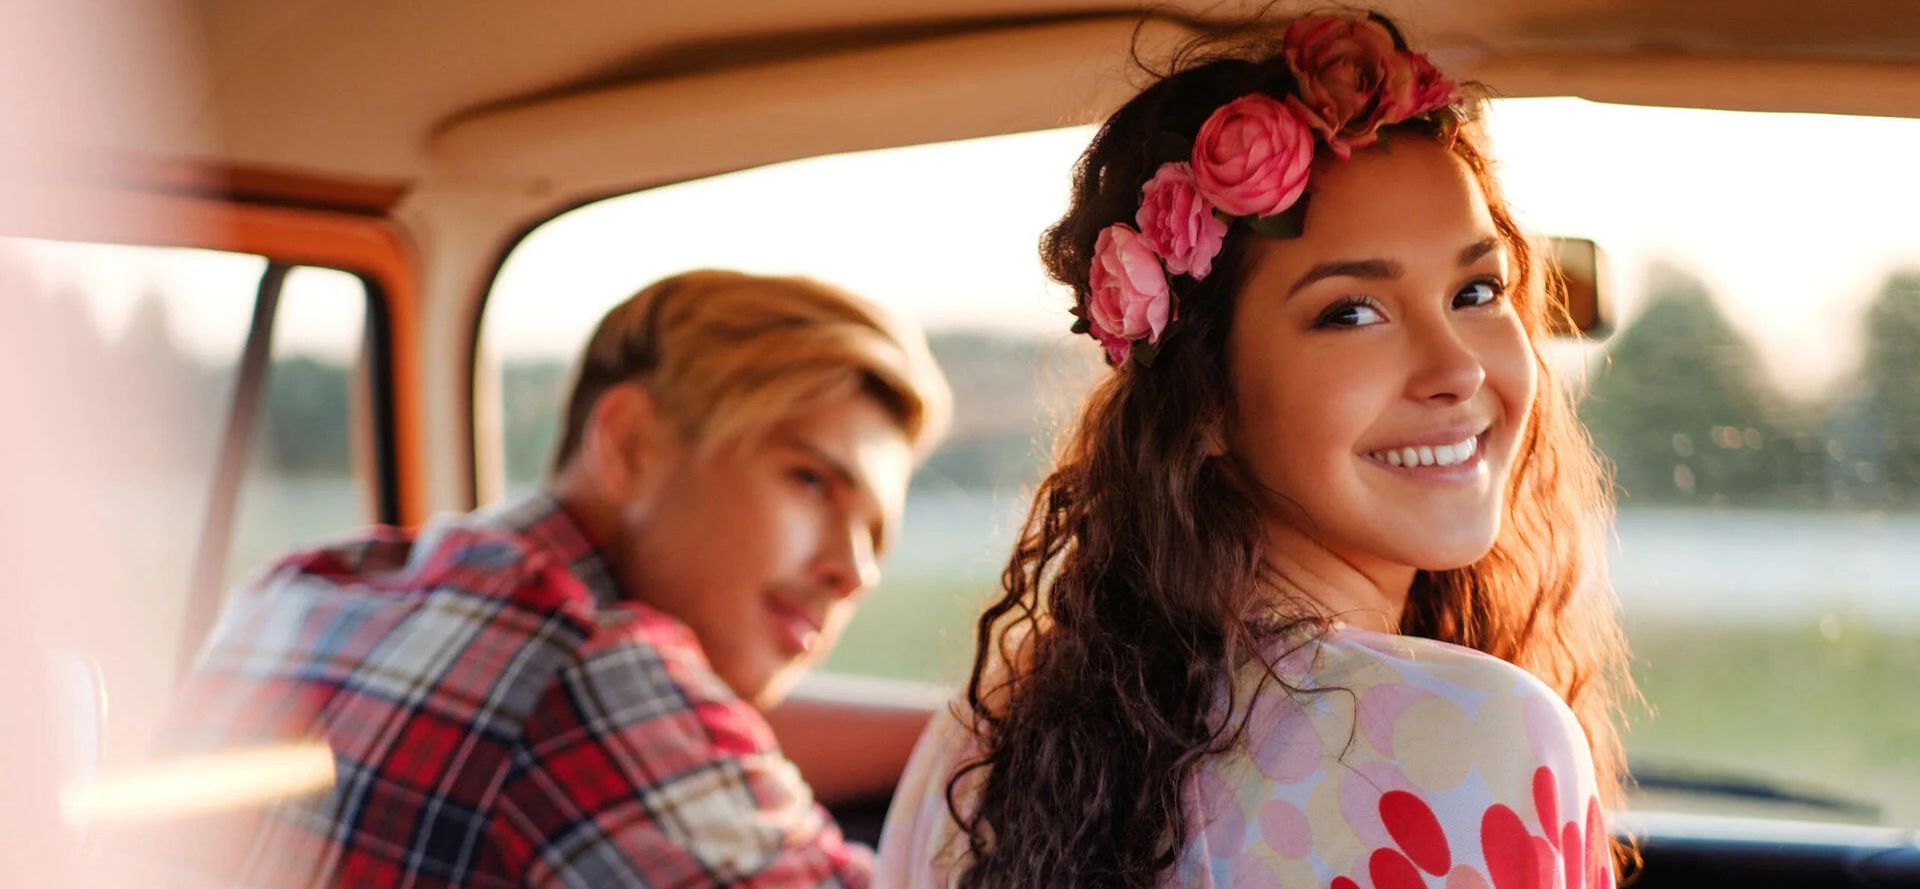 Hippie dating in a car.